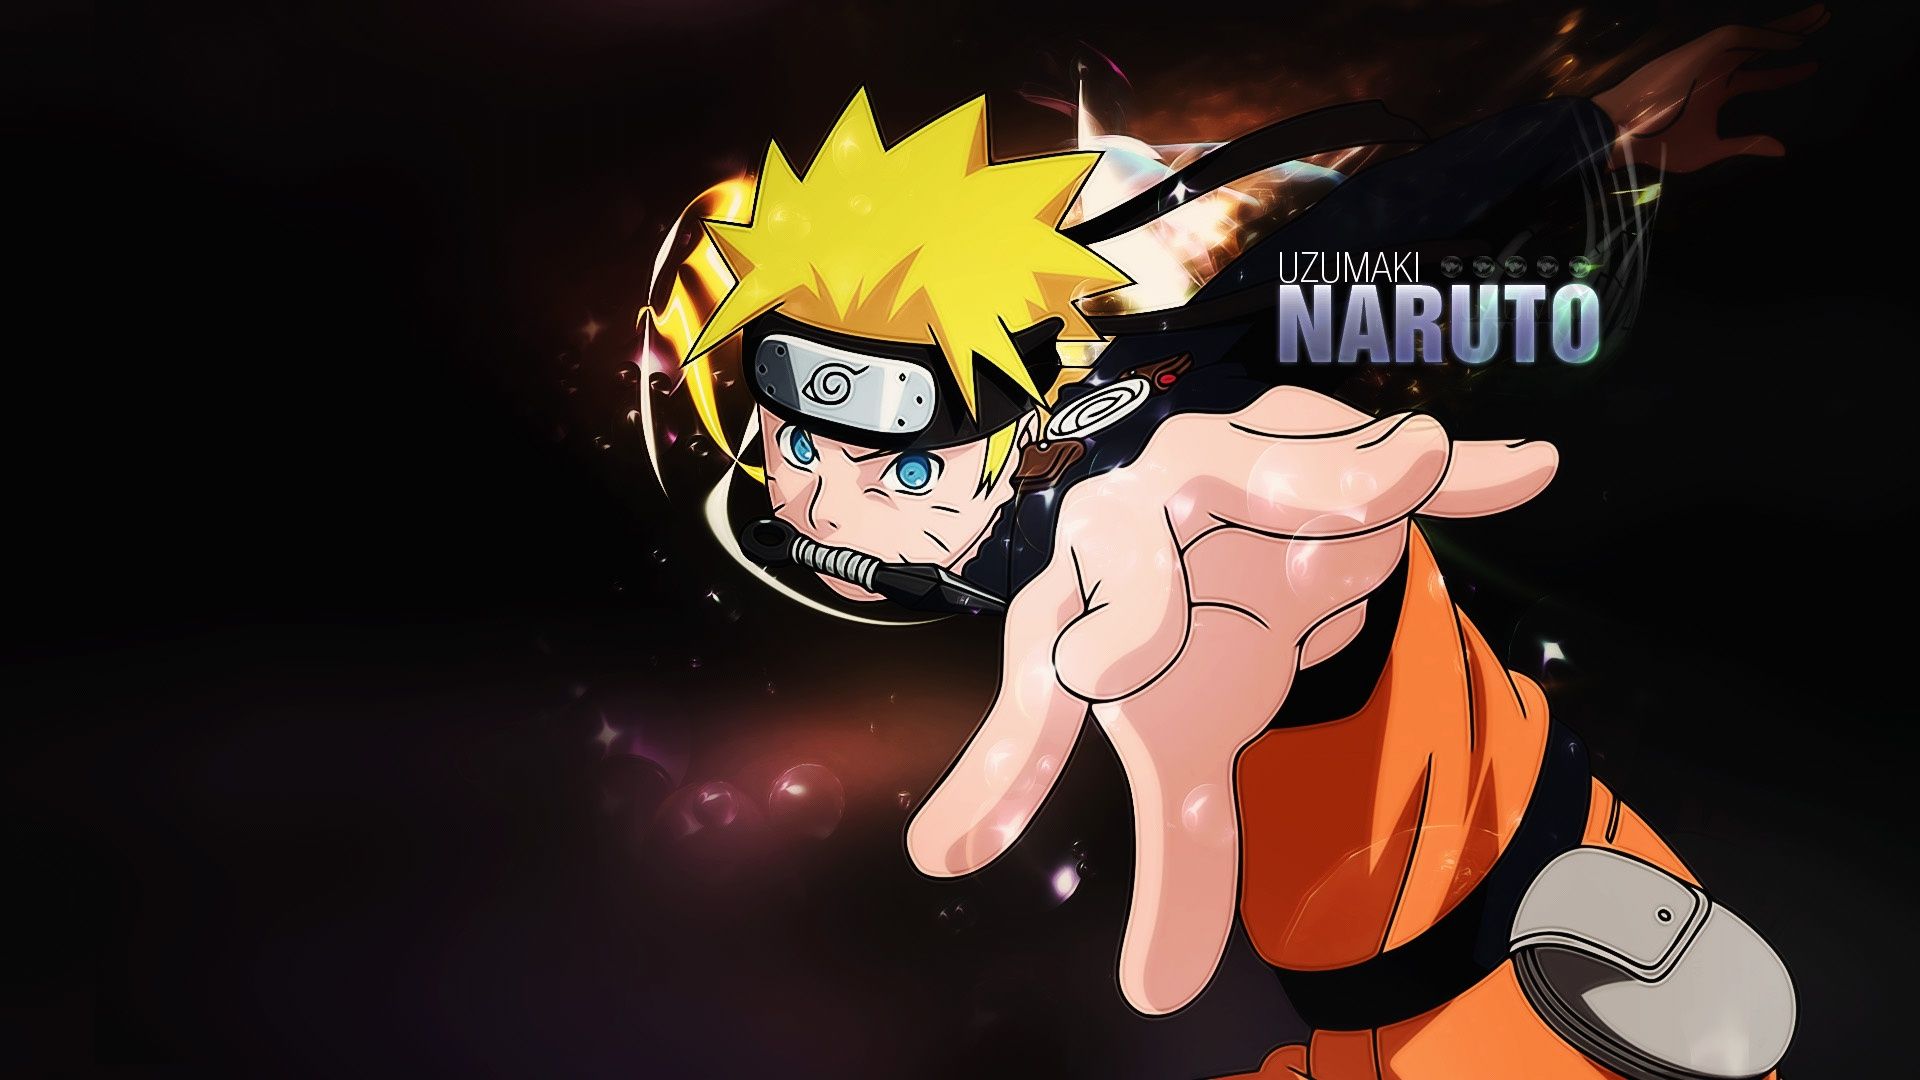 1920x1080 Naruto 4k Wallpaper For Your Desktop Or Mobile Screen Free And Easy To Download